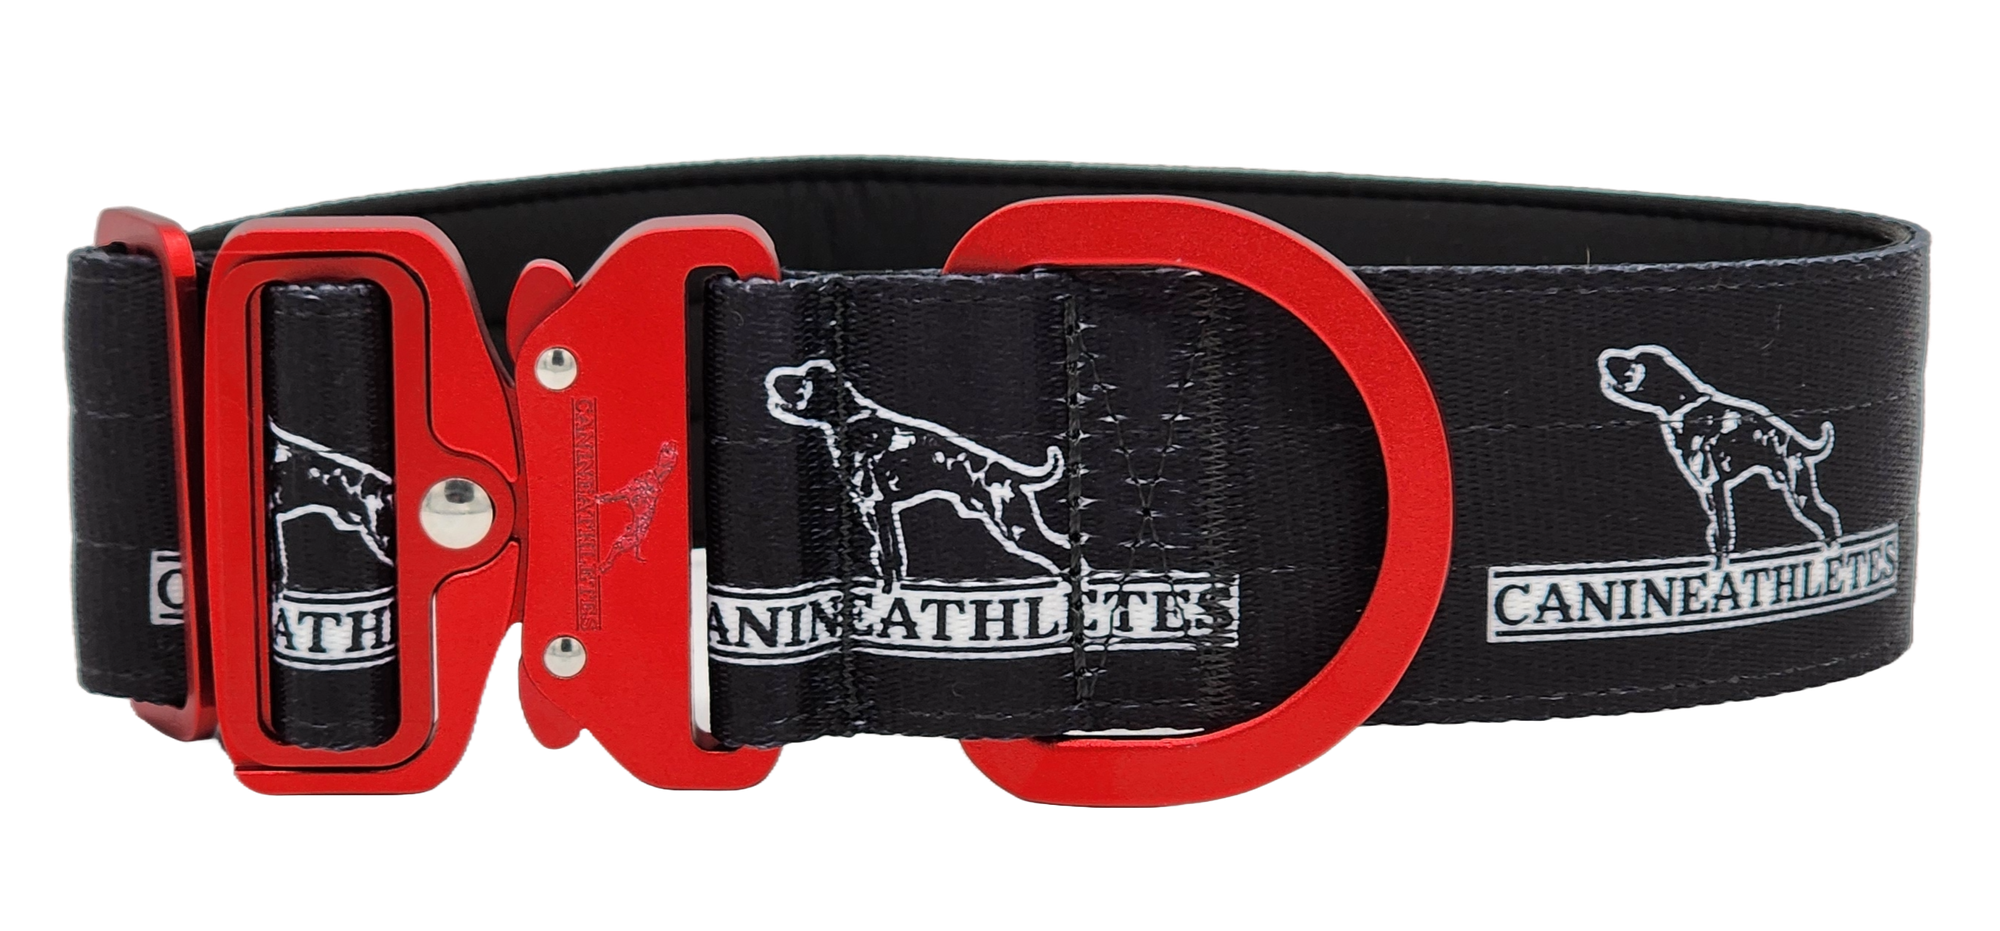 canine-athletes-sport-hd-v2-quick-release-dog-collar-black-red